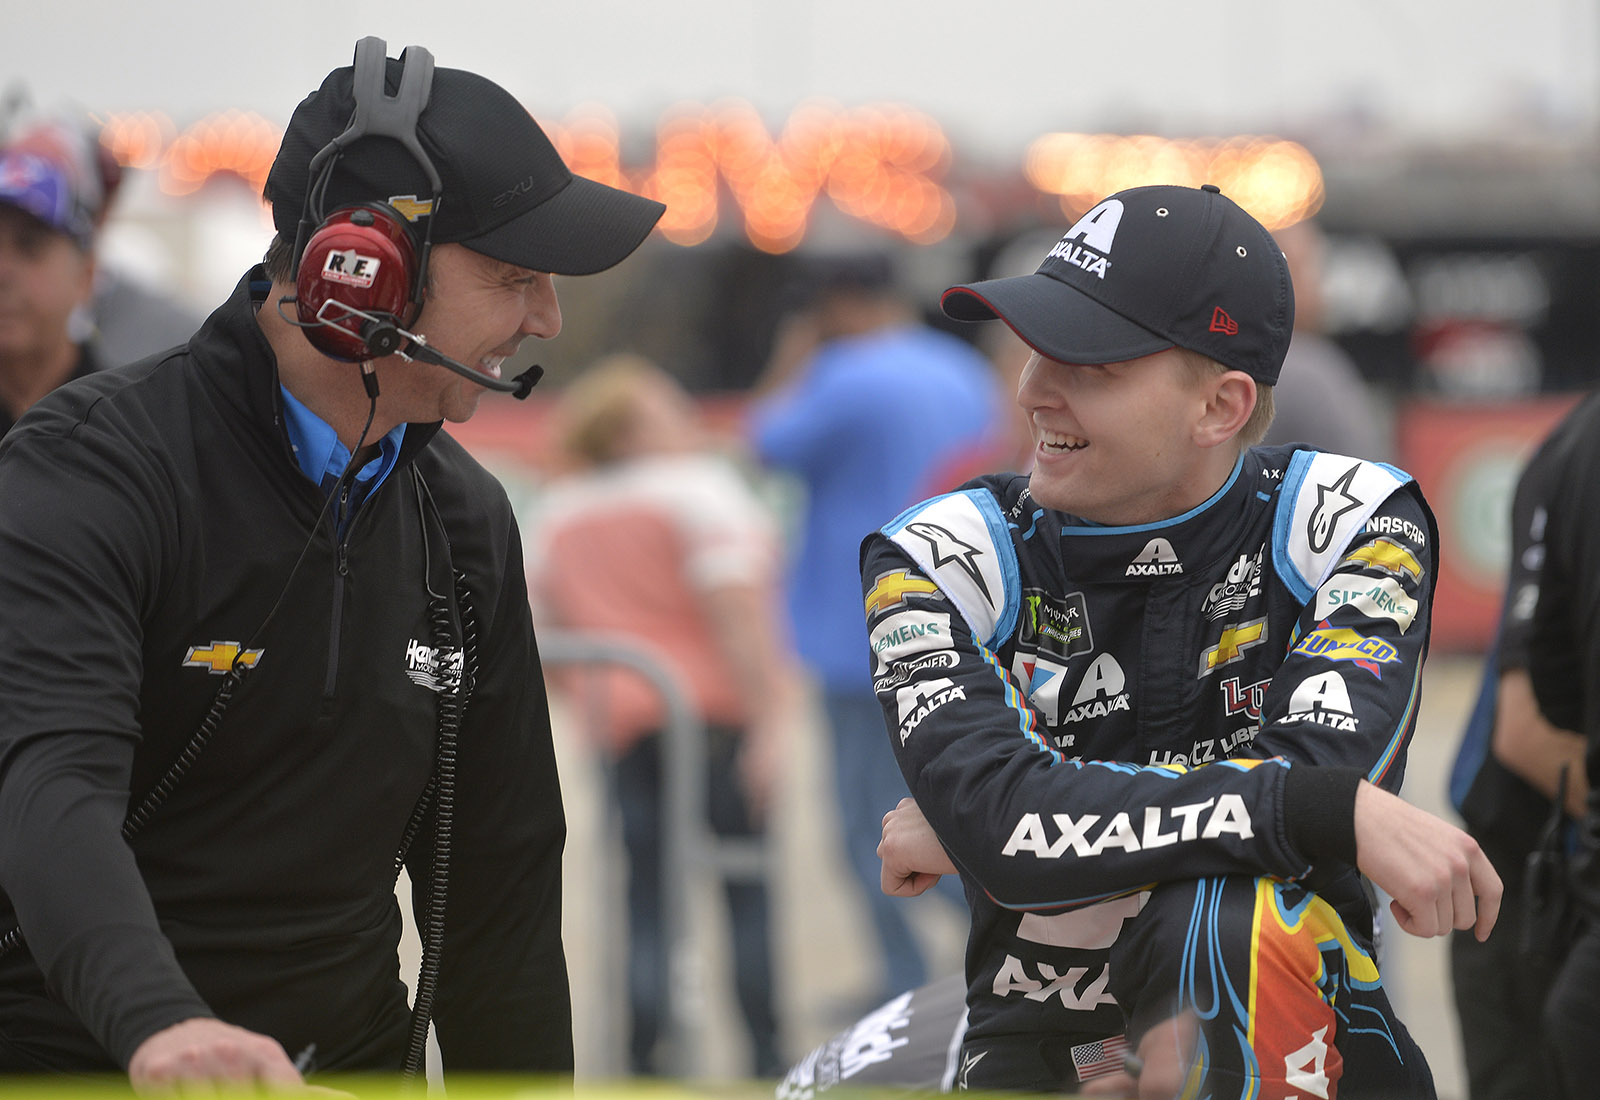 On the contrary, Byron perceives Chad Knaus in a positive light. (Photo Credit: Phil Cavali)